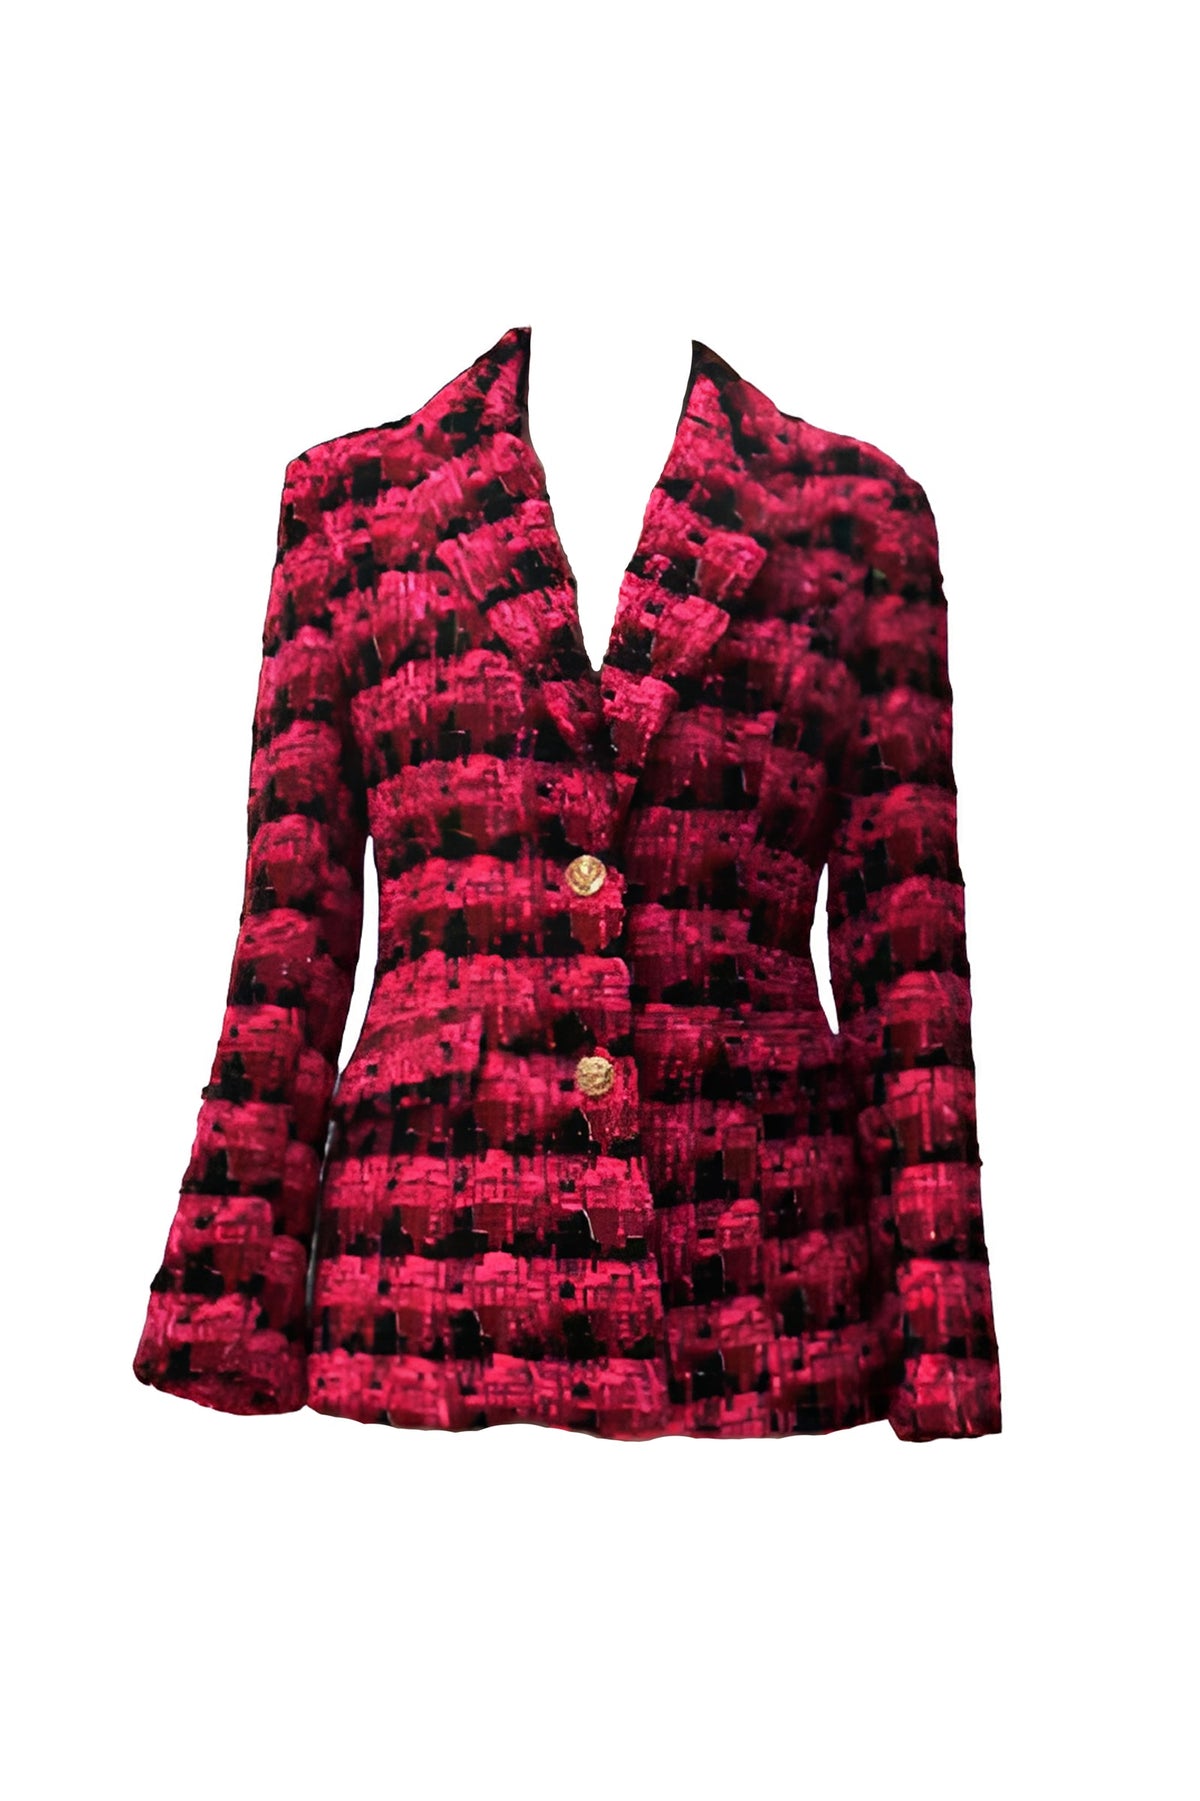 Chanel Style Boucle Tweed Plaid Blazer - Red/Hot Pink/Black